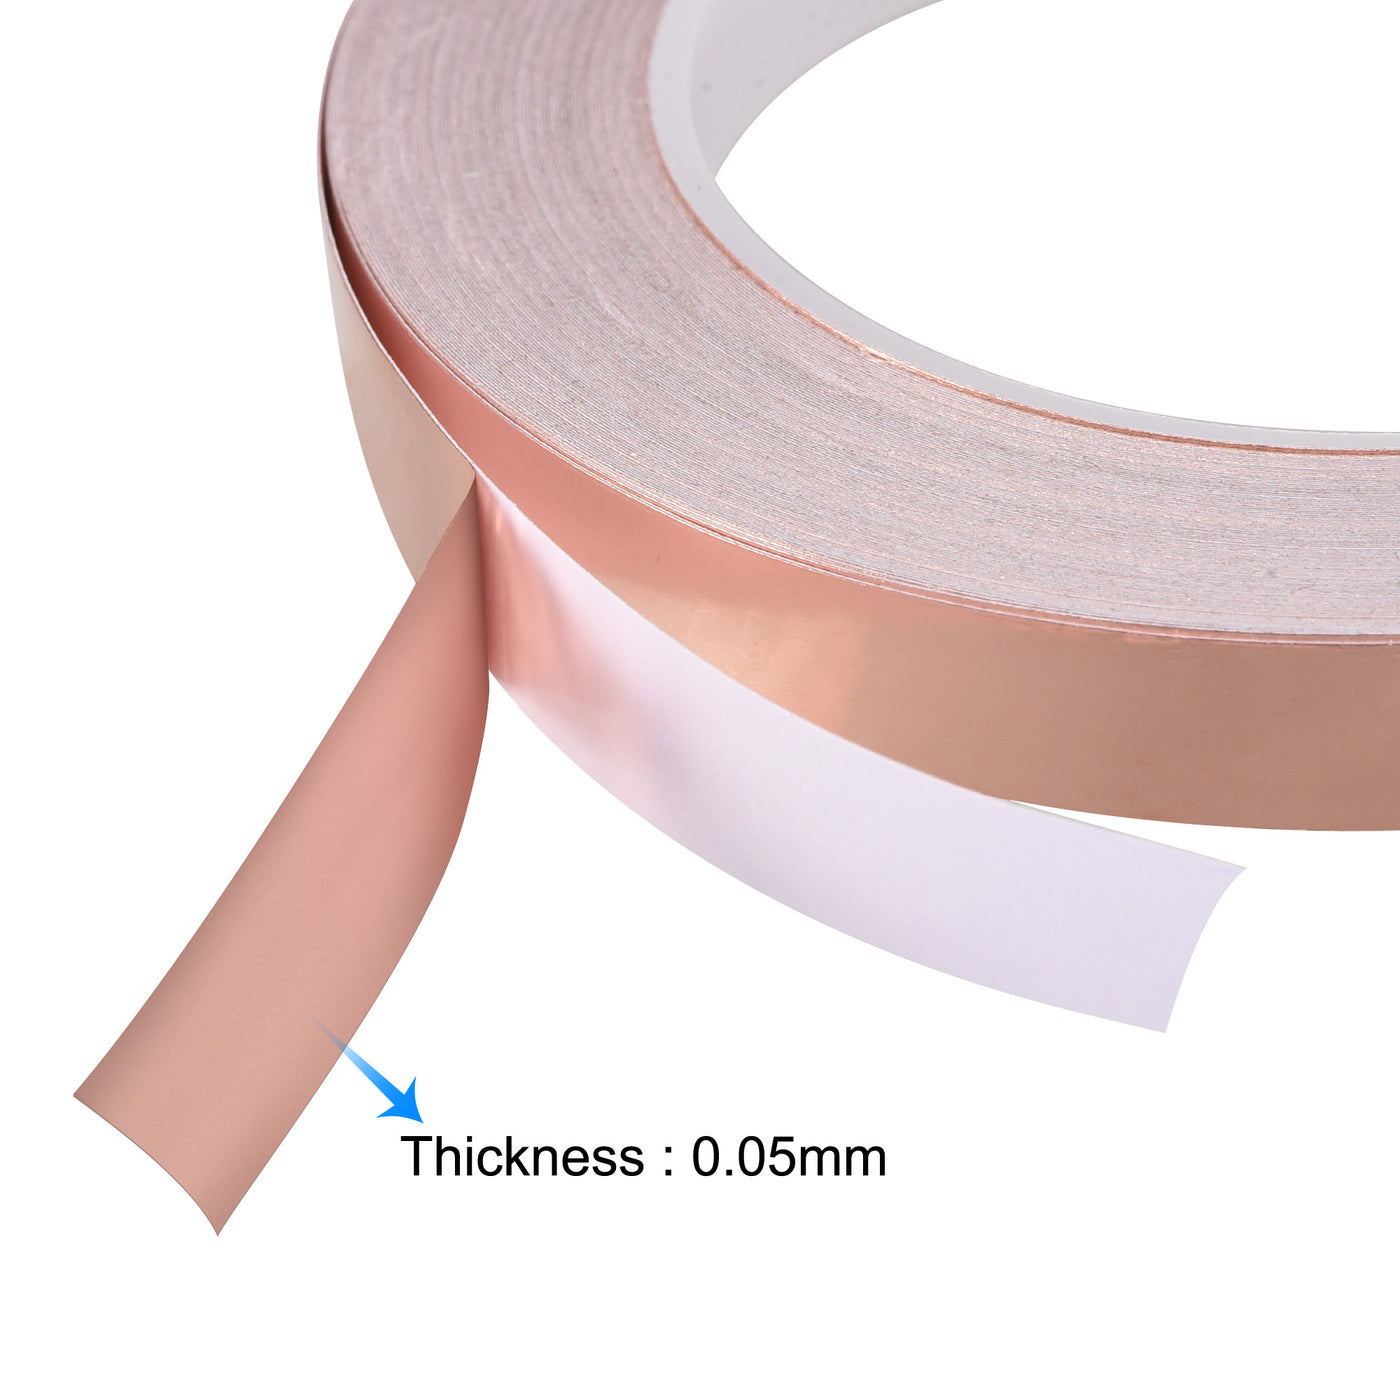 uxcell Uxcell Single-Sided Conductive Tape Copper Foil Tape 4mm x 30m/98.4ft